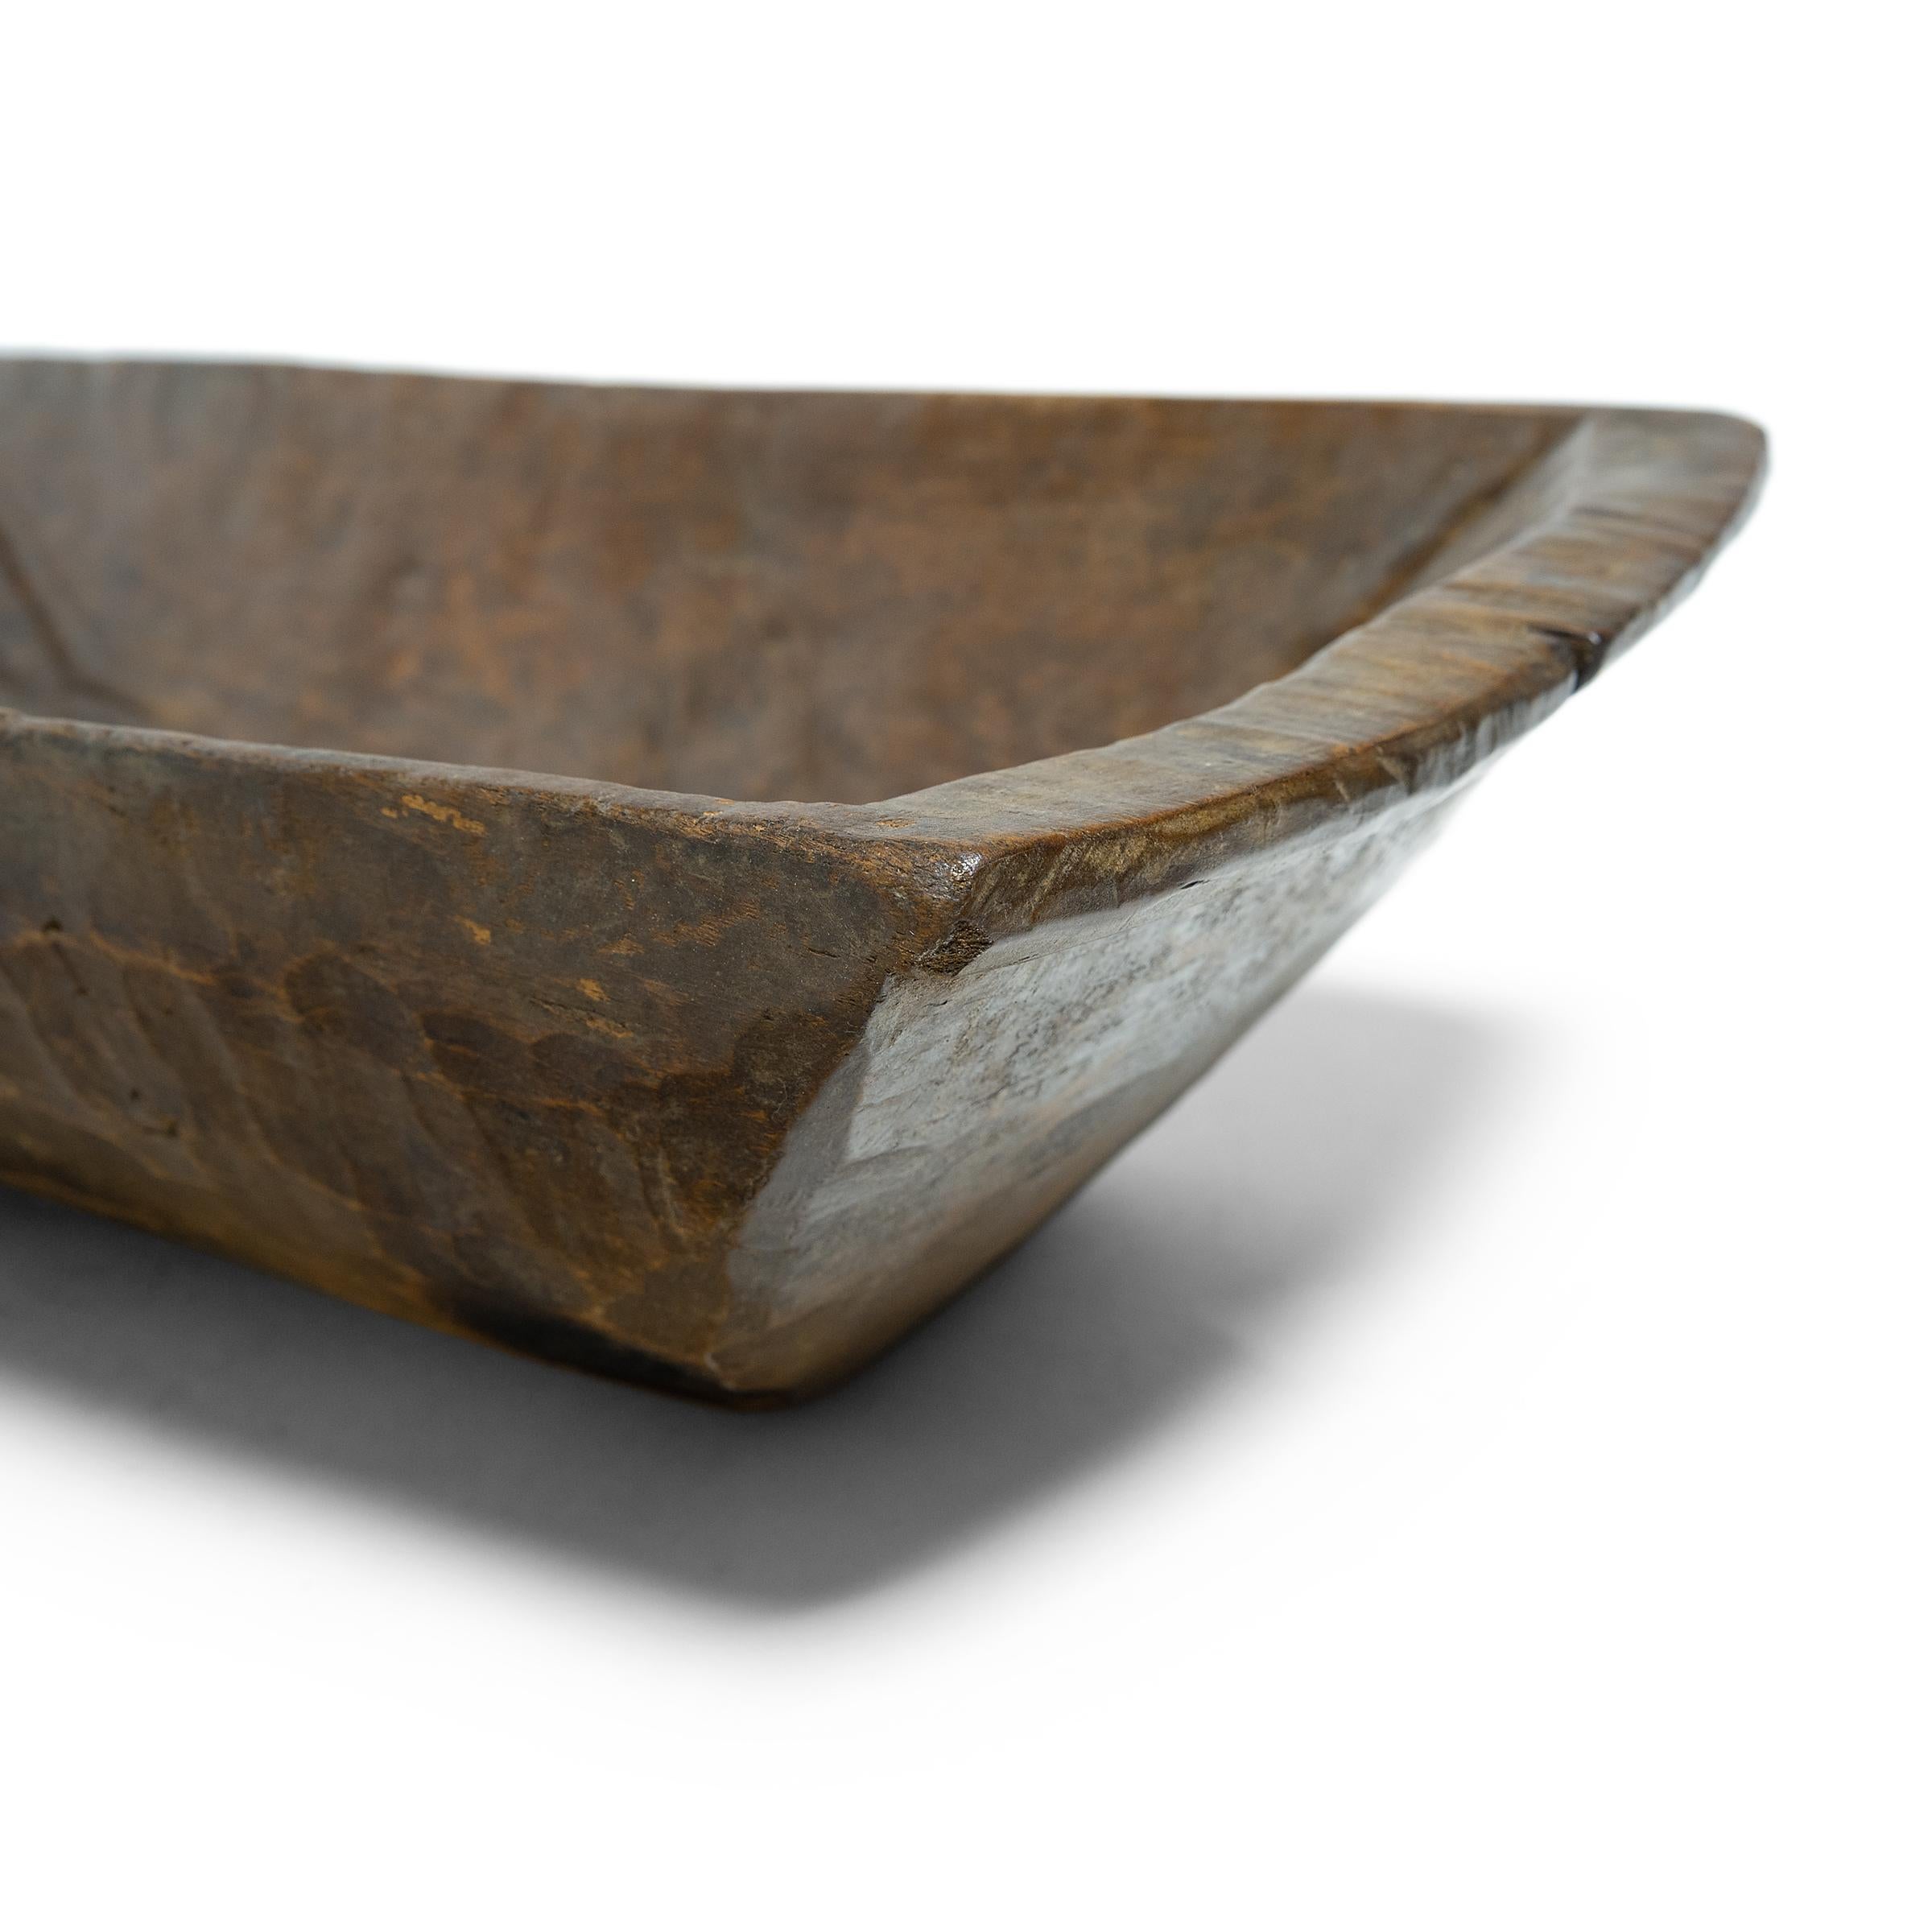 20th Century  Large Provincial Chinese Farm Tray, c. 1900